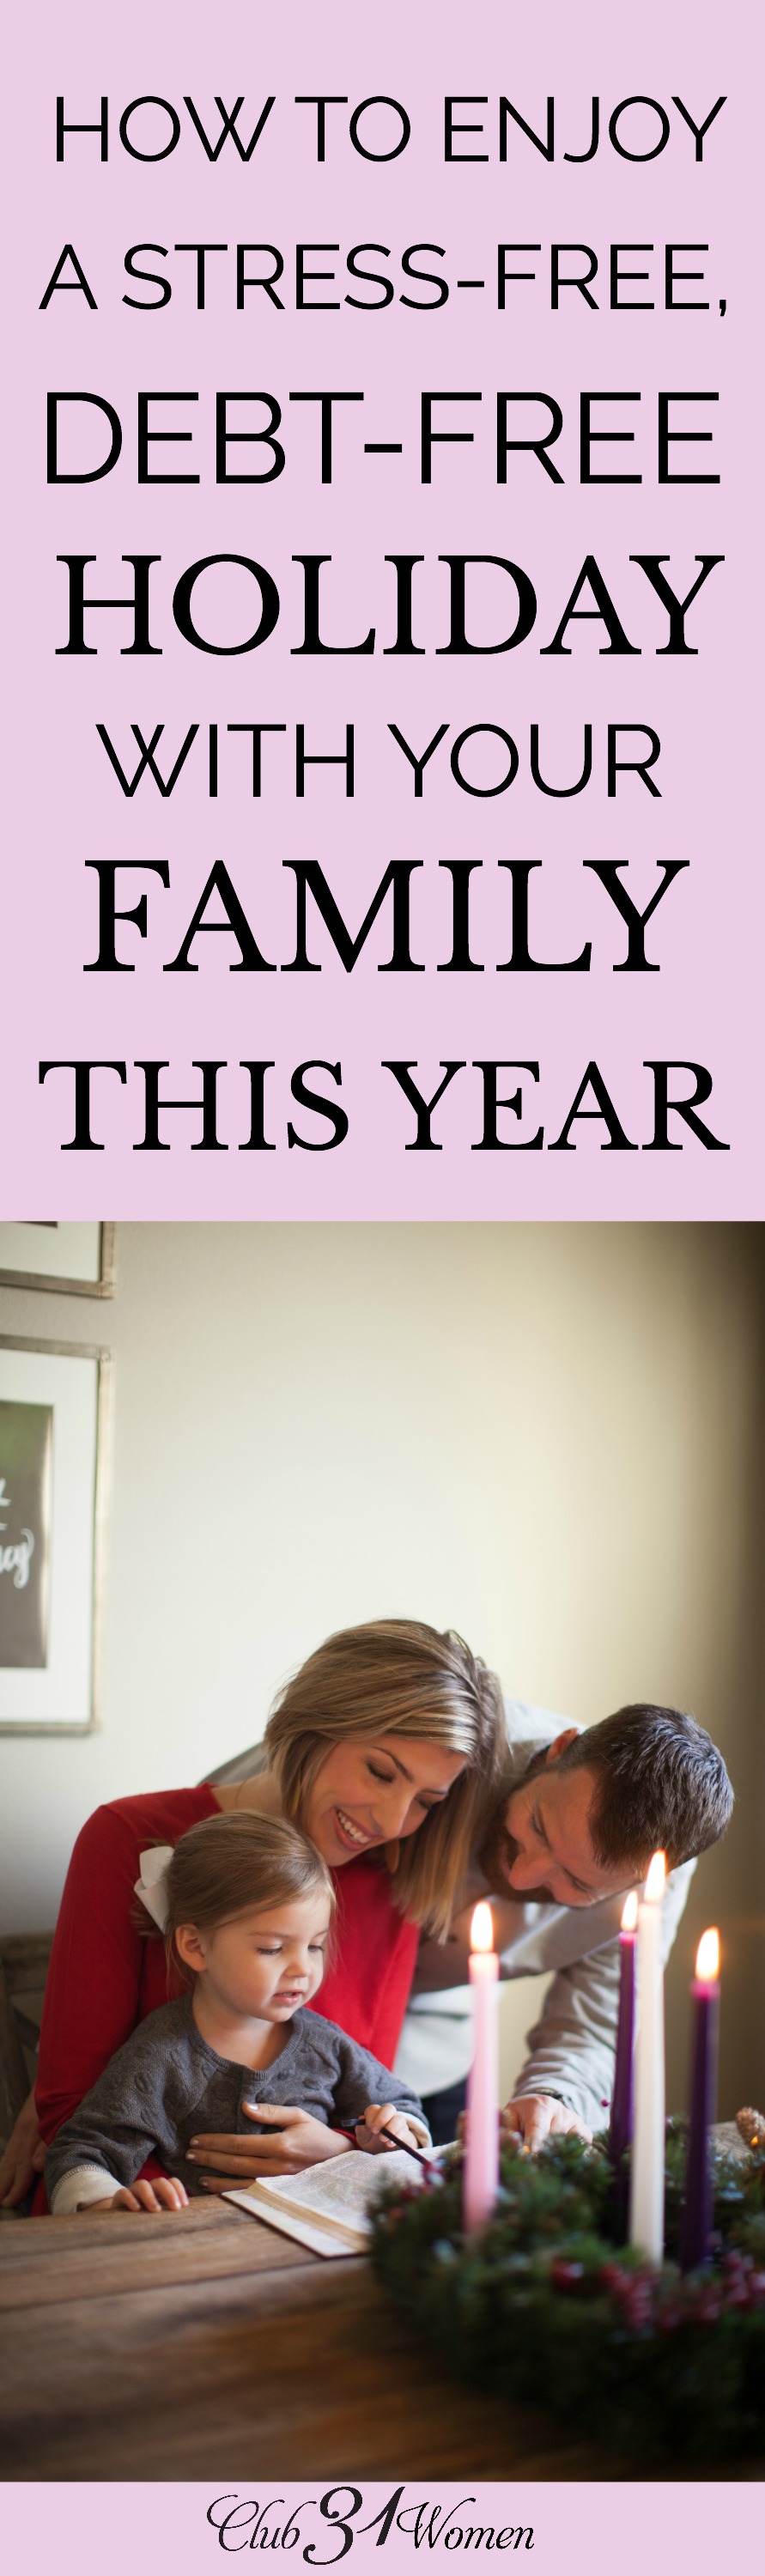 How can you have a stress-free, debt-free holiday with your family? Learn how to slow down and spend intentional time with your extended family. via @Club31Women